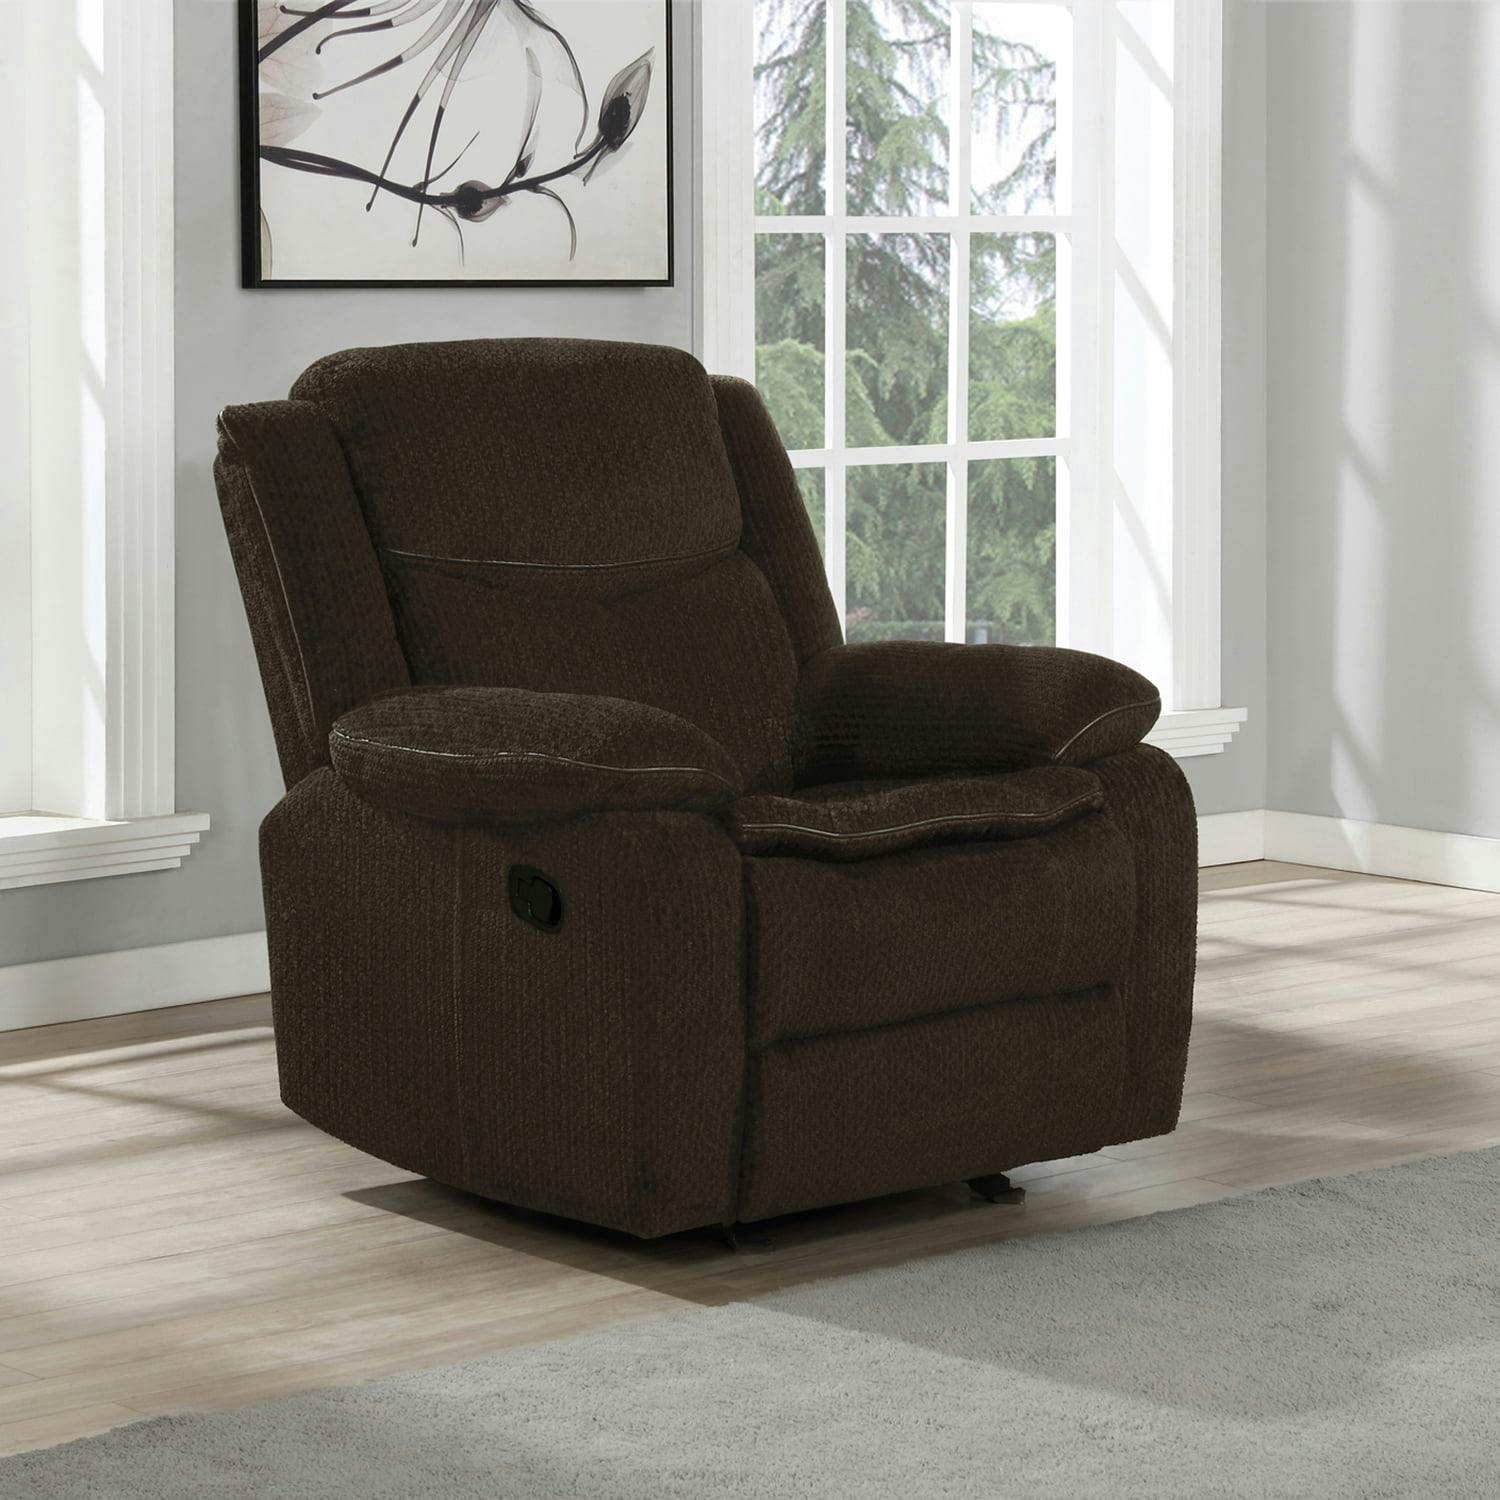 Contemporary Modern Brown Faux Leather Glider Recliner